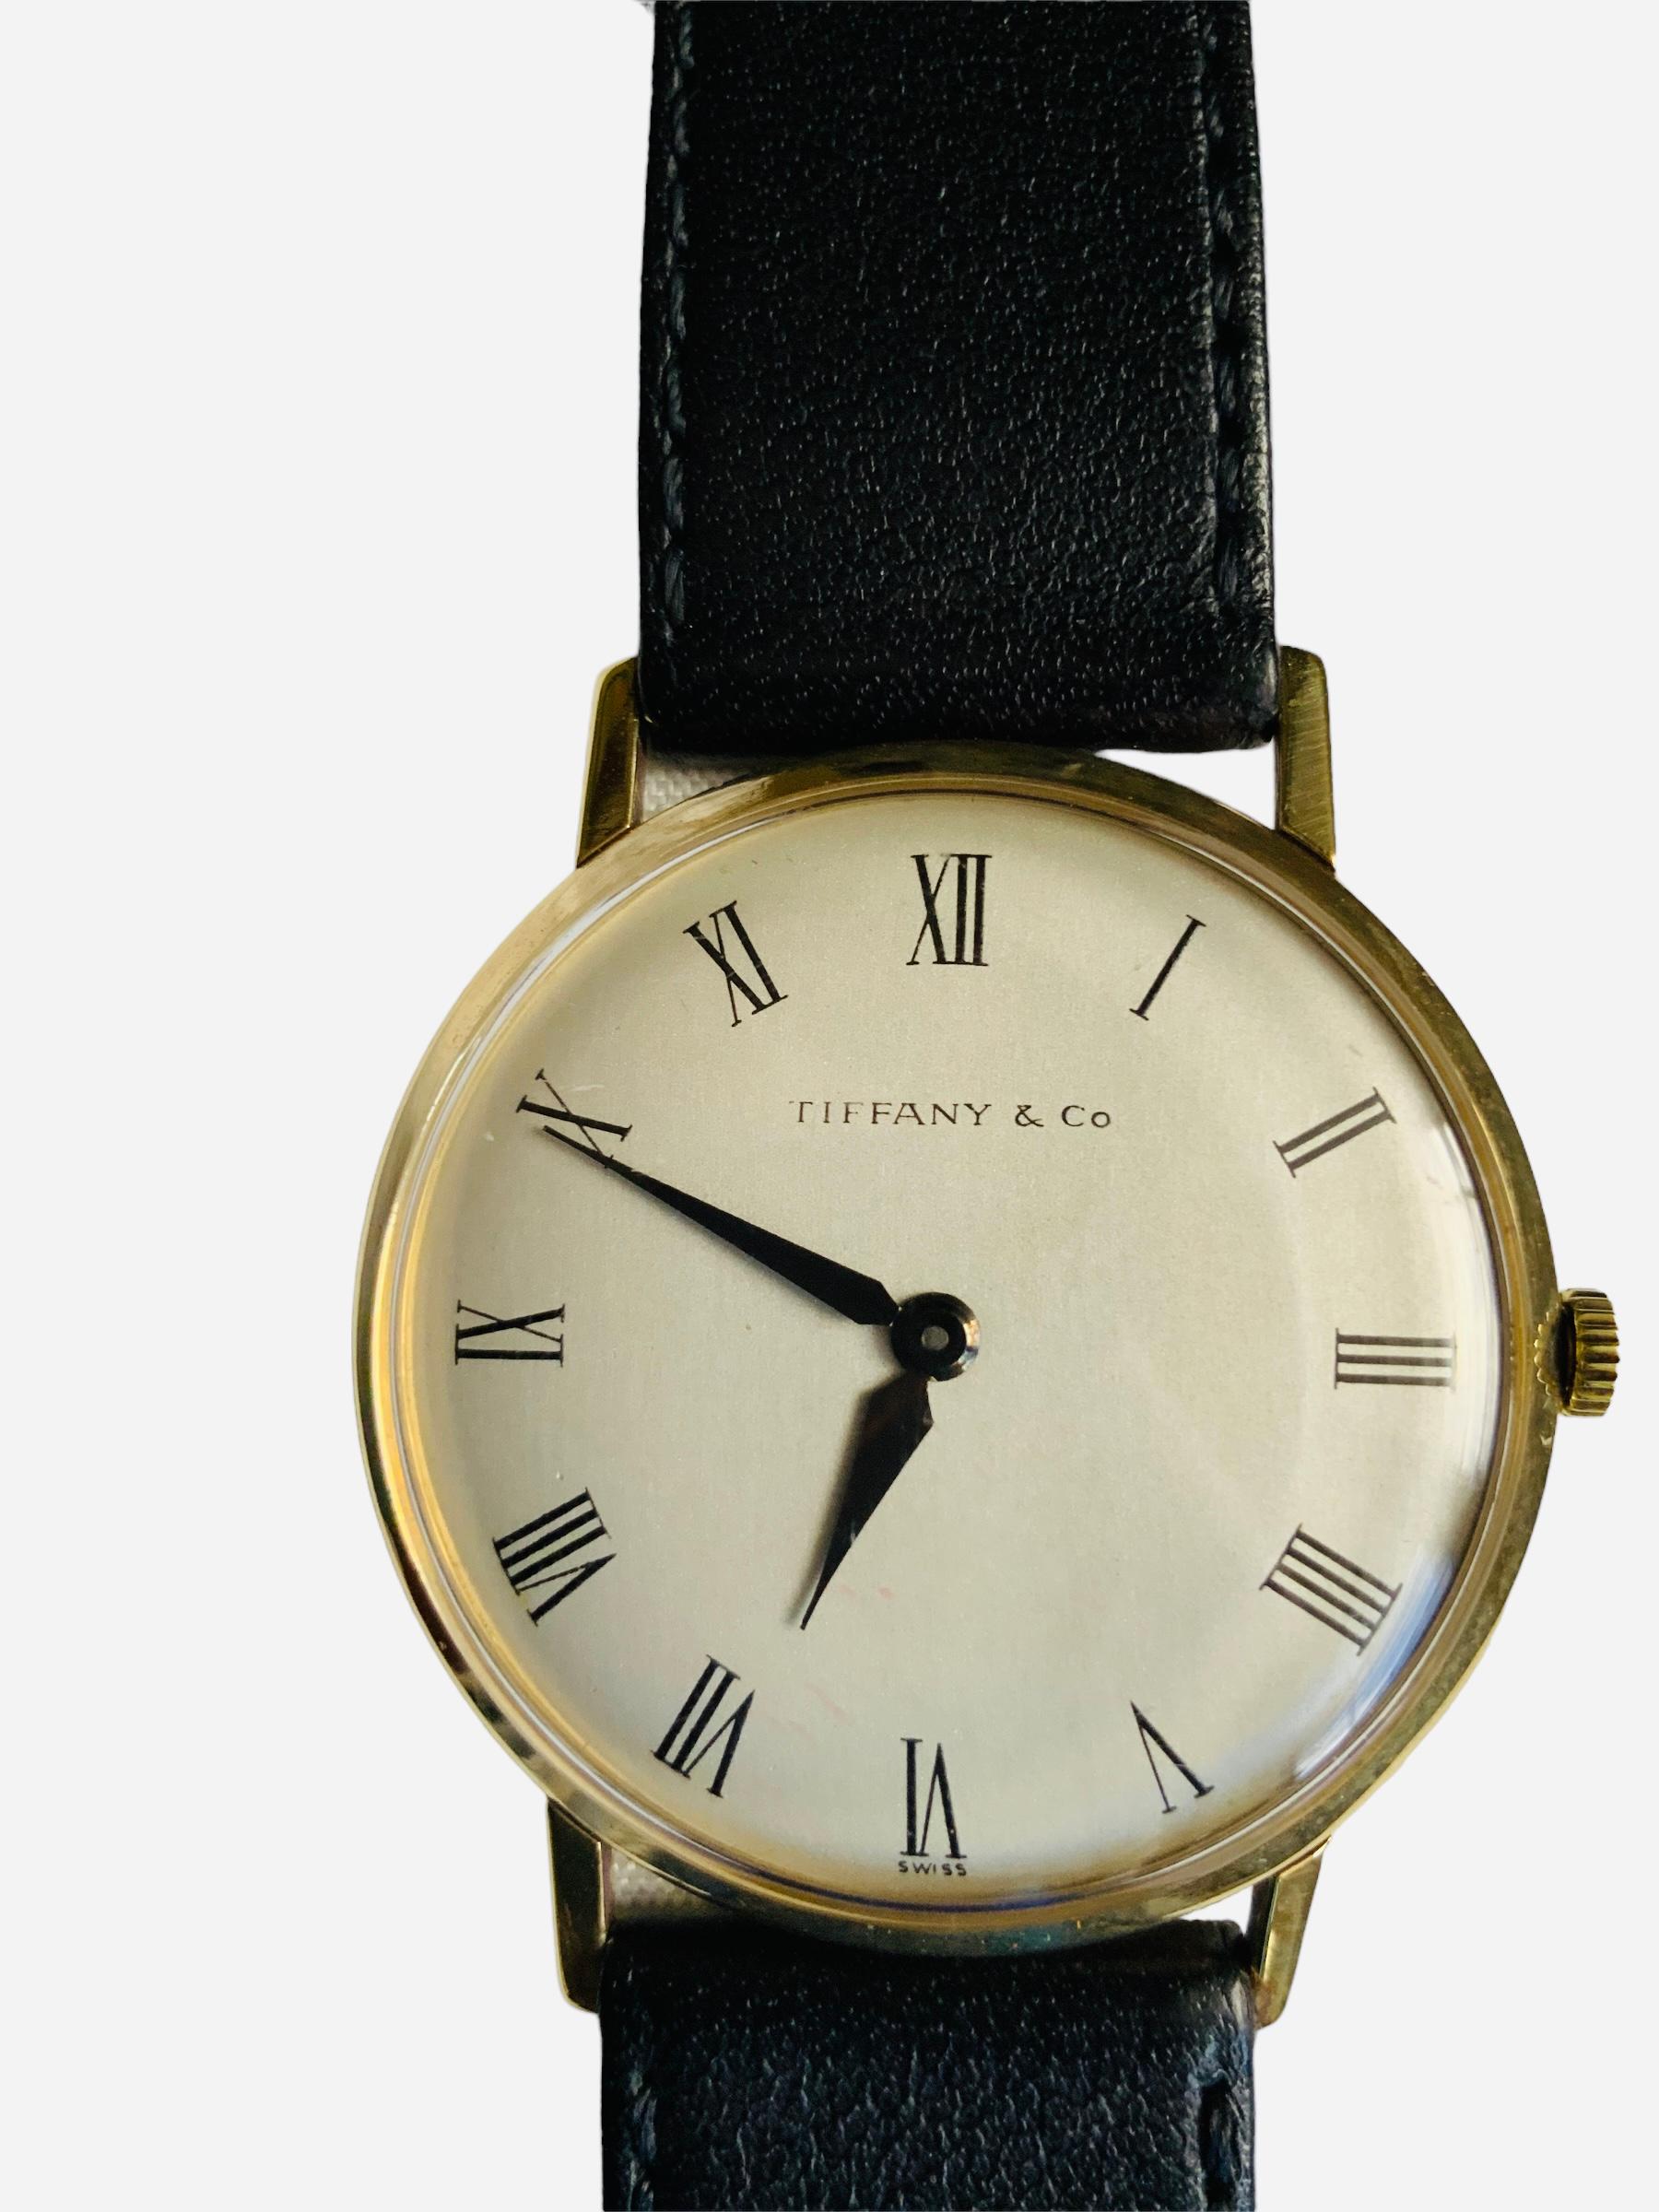 This is a Tiffany & Company Men’s Wrist Watch. It depicts an 18K gold round case with whitish grey color dial that has Roman numerals and black color hour/minute hands. Below the 6 o’ clock position, it is hallmarked Swiss. A glass covers the case.